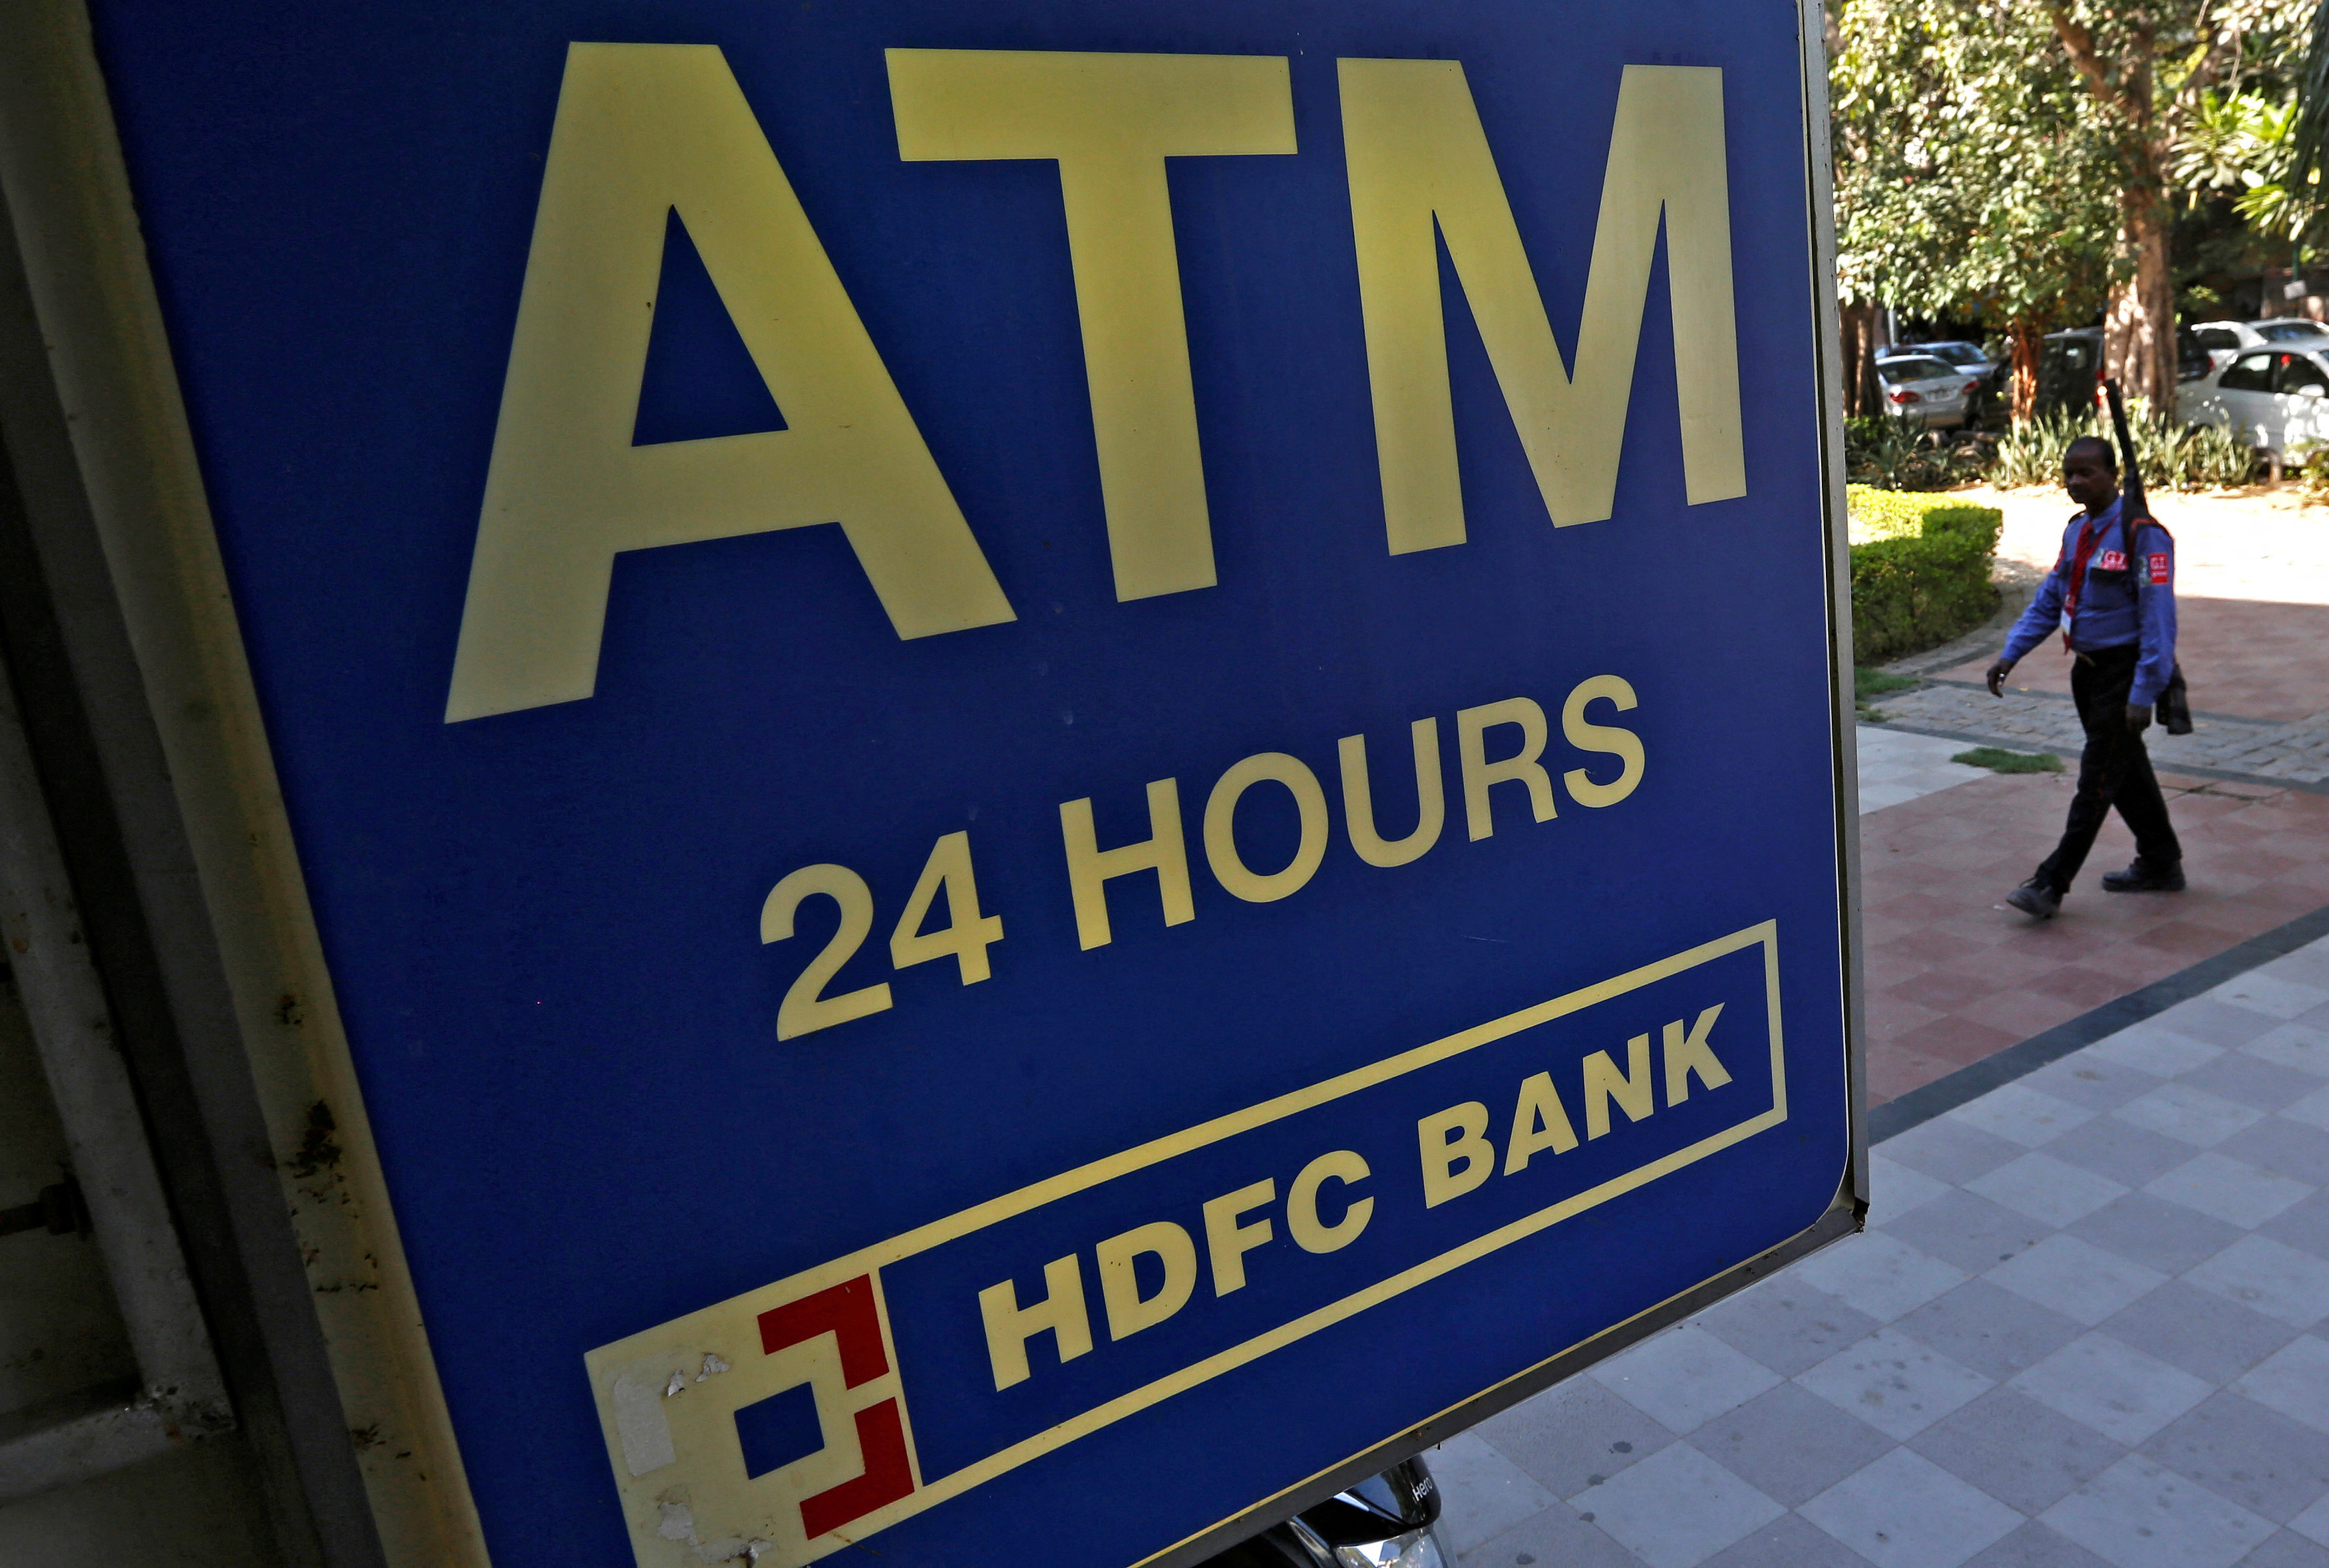 A private security guard moves past a signboard of a HDFC Bank ATM in New Delhi